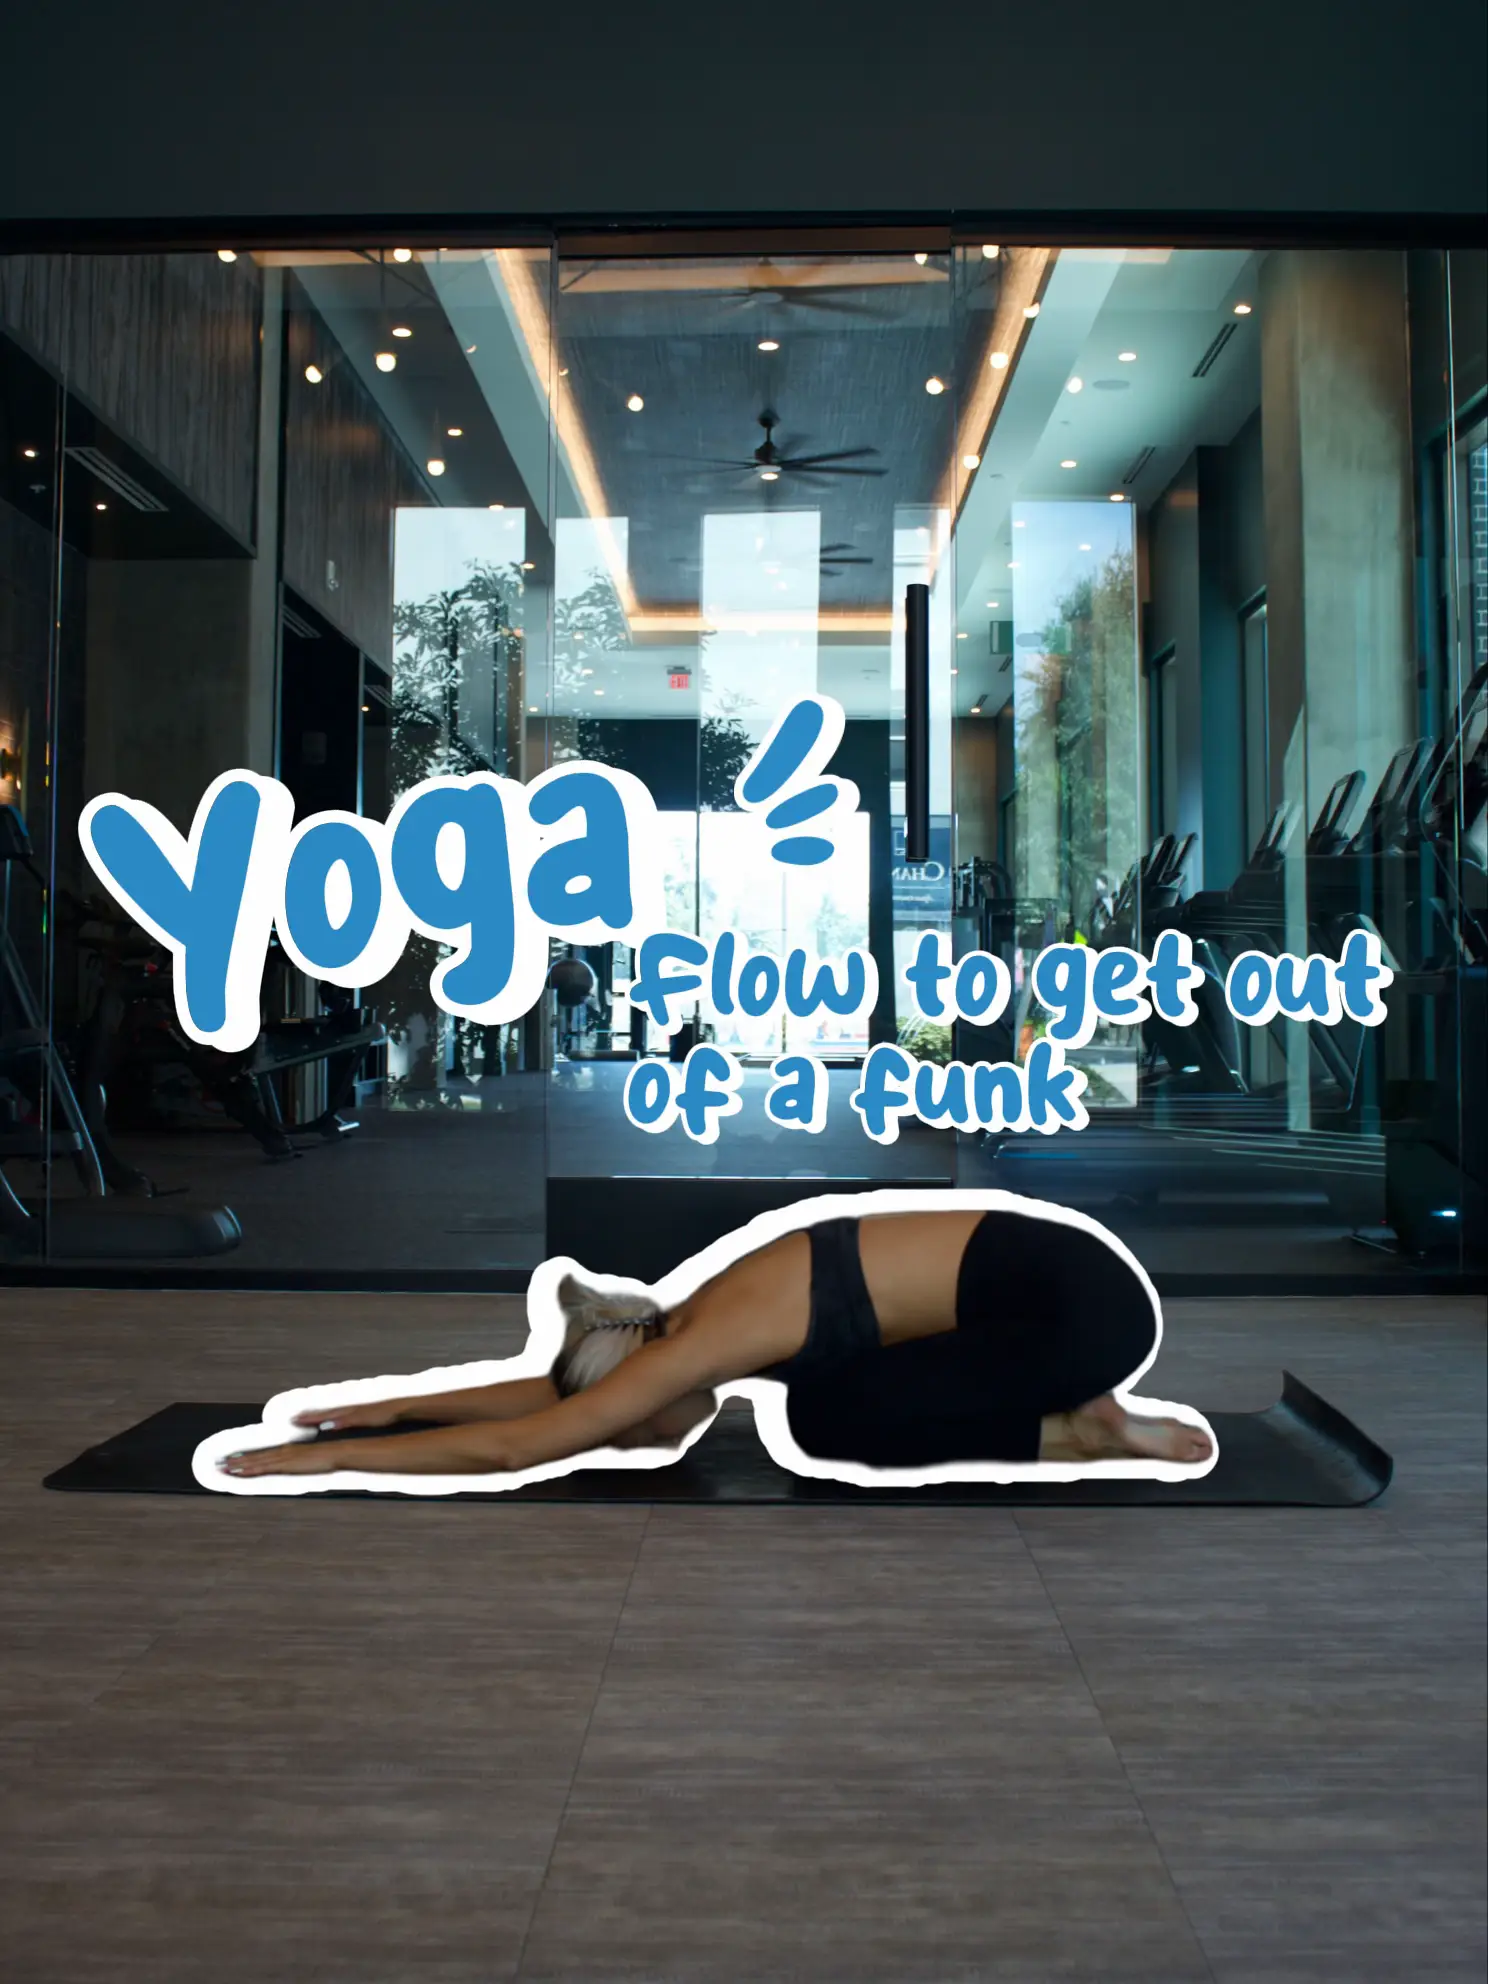 Flip Dog Yoga - Meme-off Day 5 with The Yoga Zen Me trying to get my  wife/friends/strangers to come to class 😂 Thanks for all the love these  last few days. It's